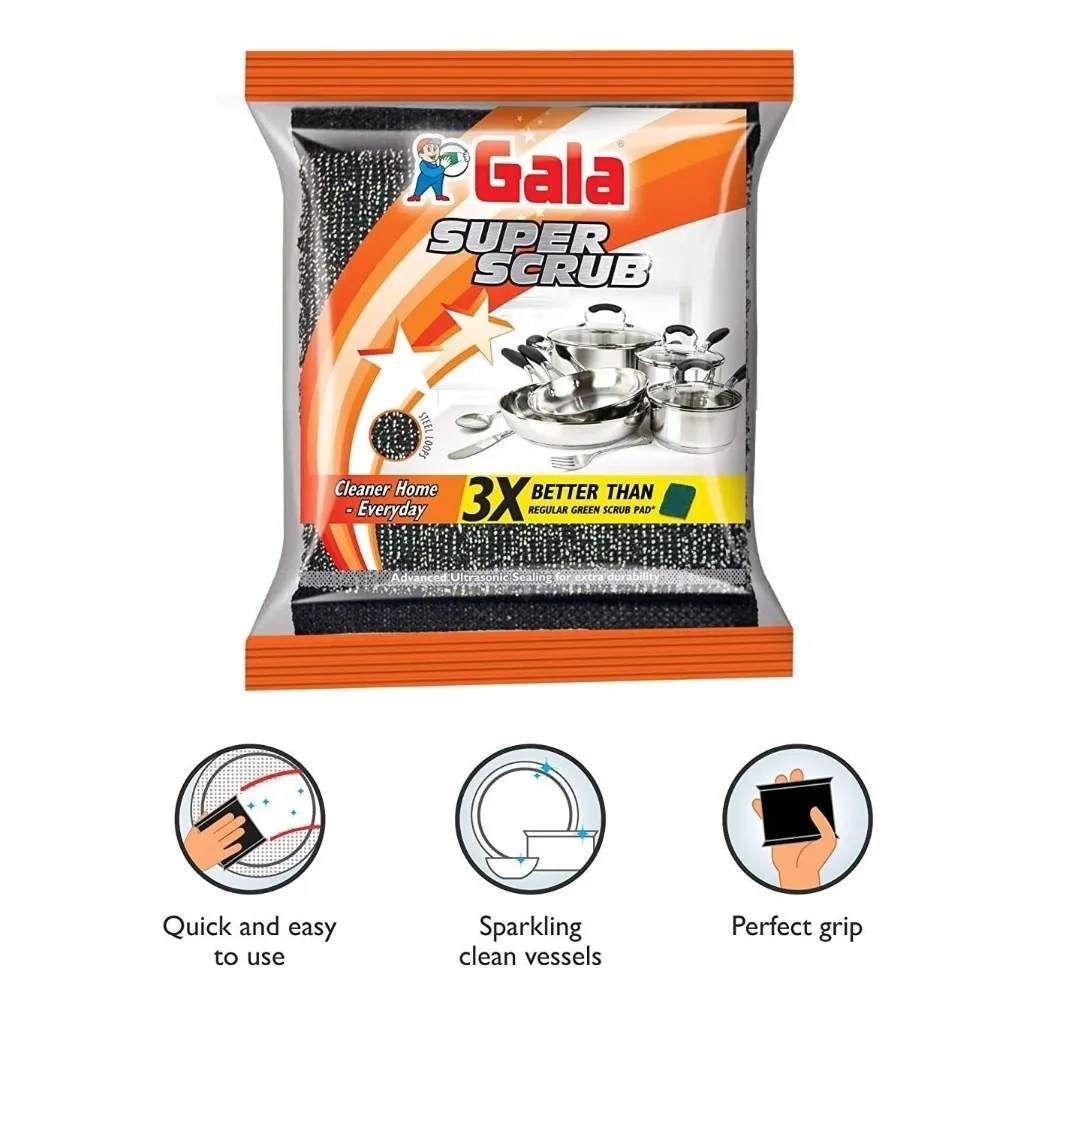 Gala Super Scrub, 3 Time Better Than Regular, Cleaner Home, Pack of 1